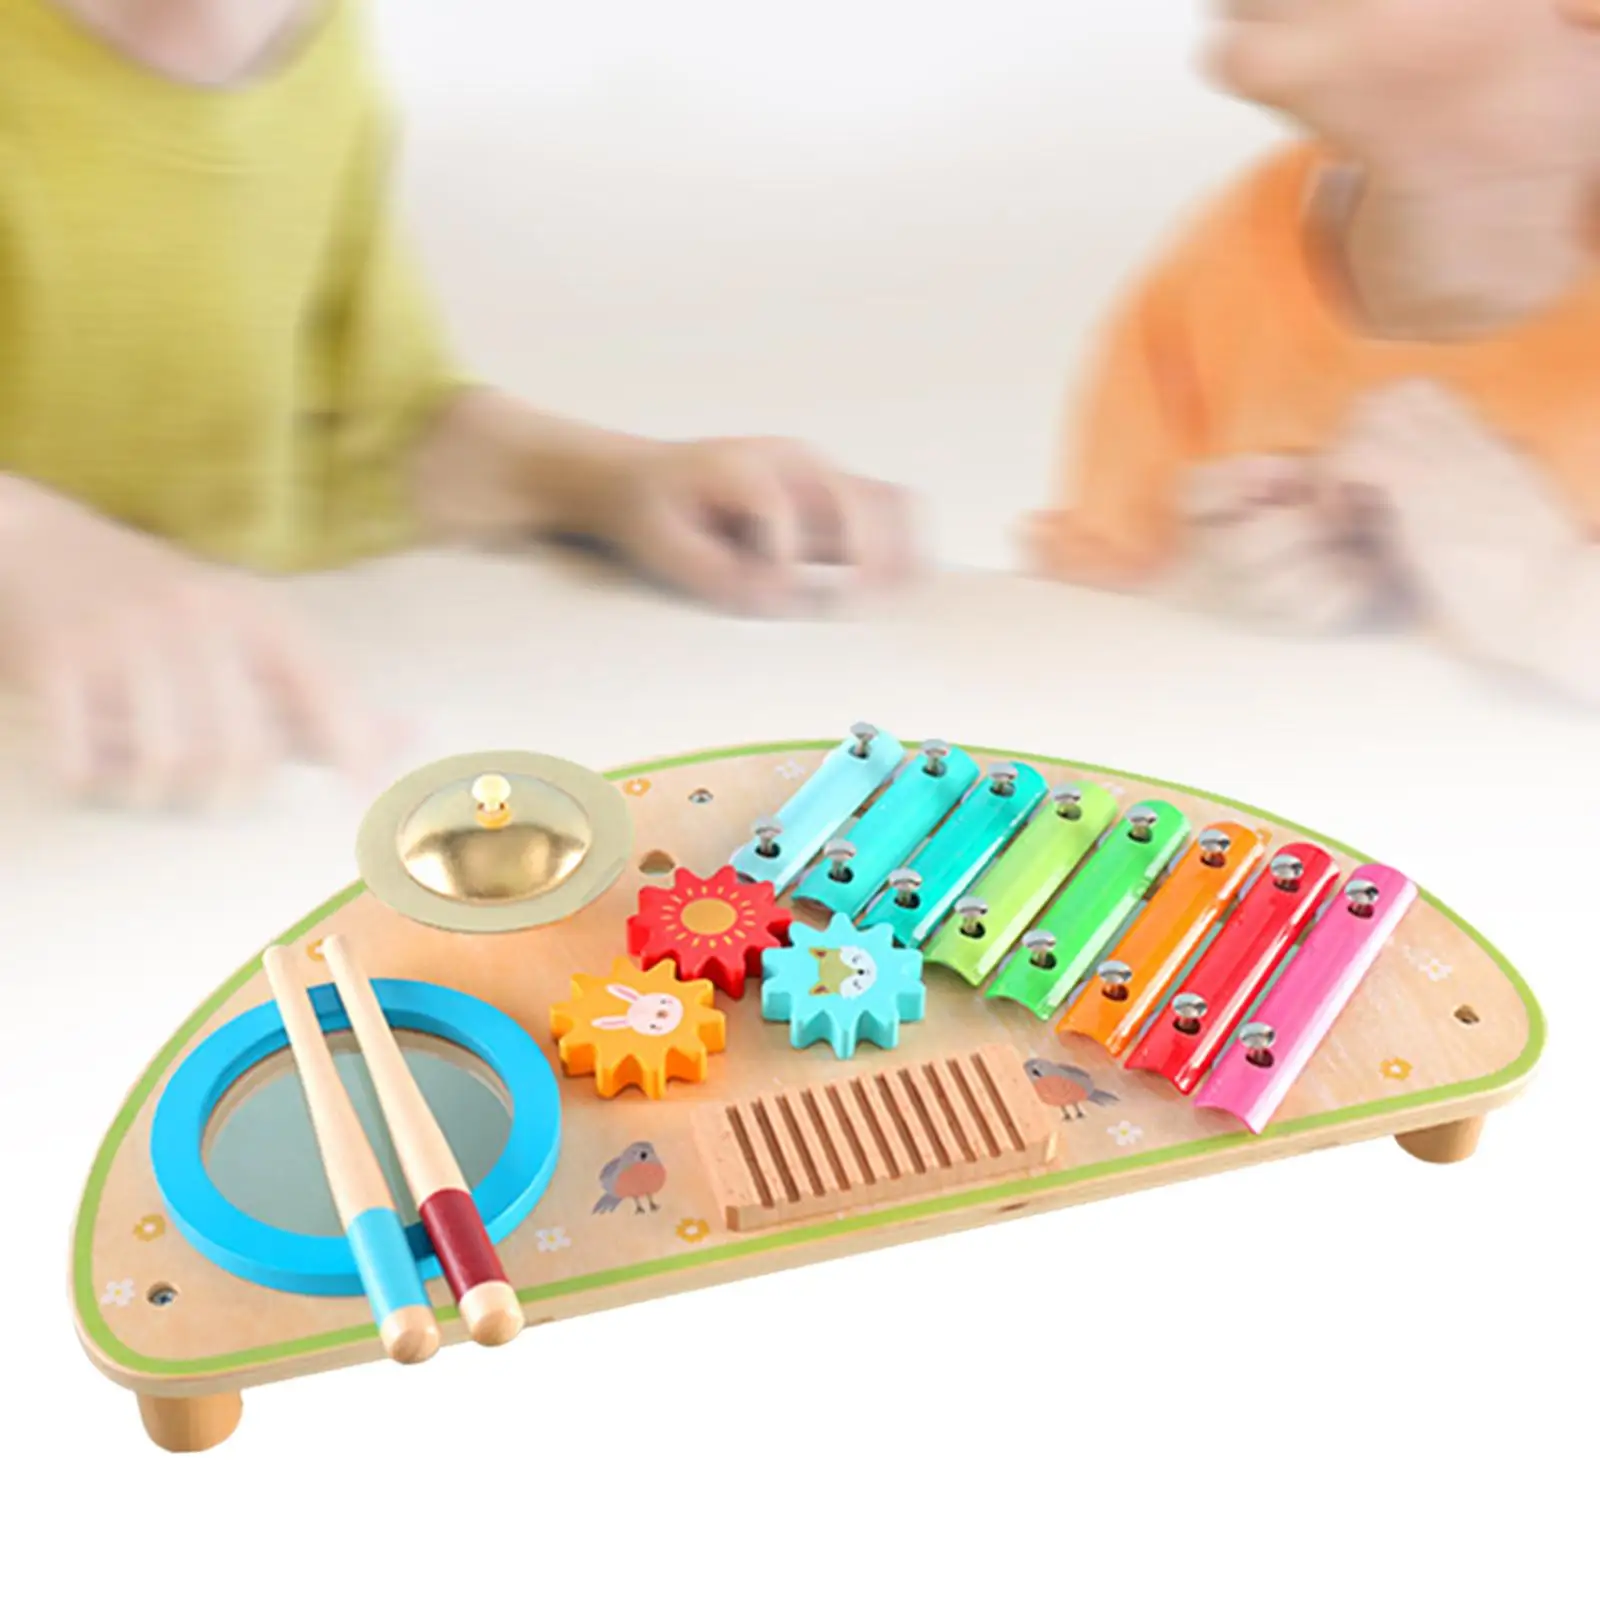 Xylophone Drum Set Multifunction Wooden Percussion Musical Toys for Ages 3 4 5 6 Years Old Toddlers Kids Boy Girl Children